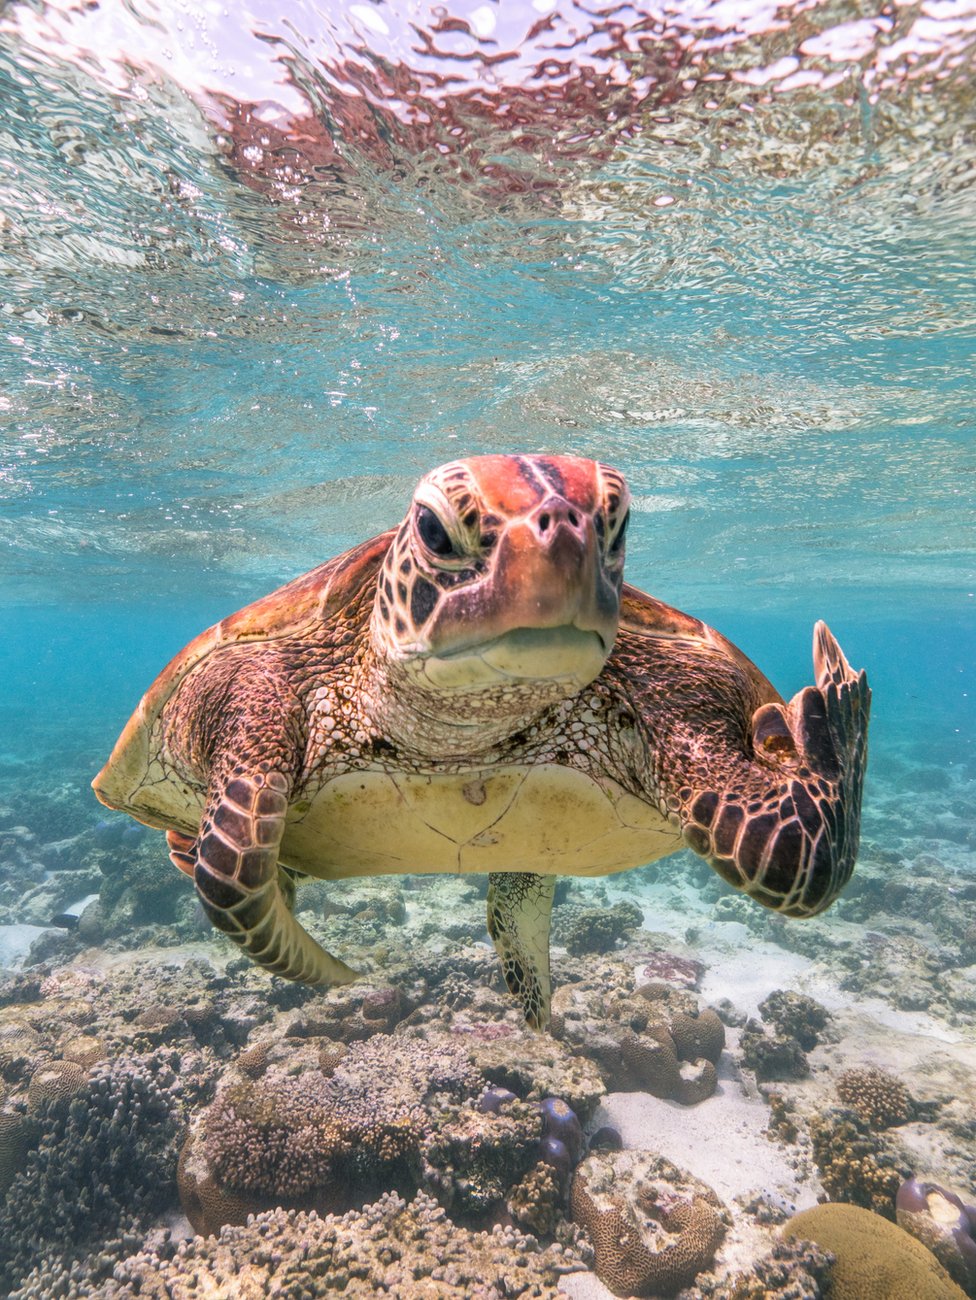 A turtle appearing to be gesticulating at the camera